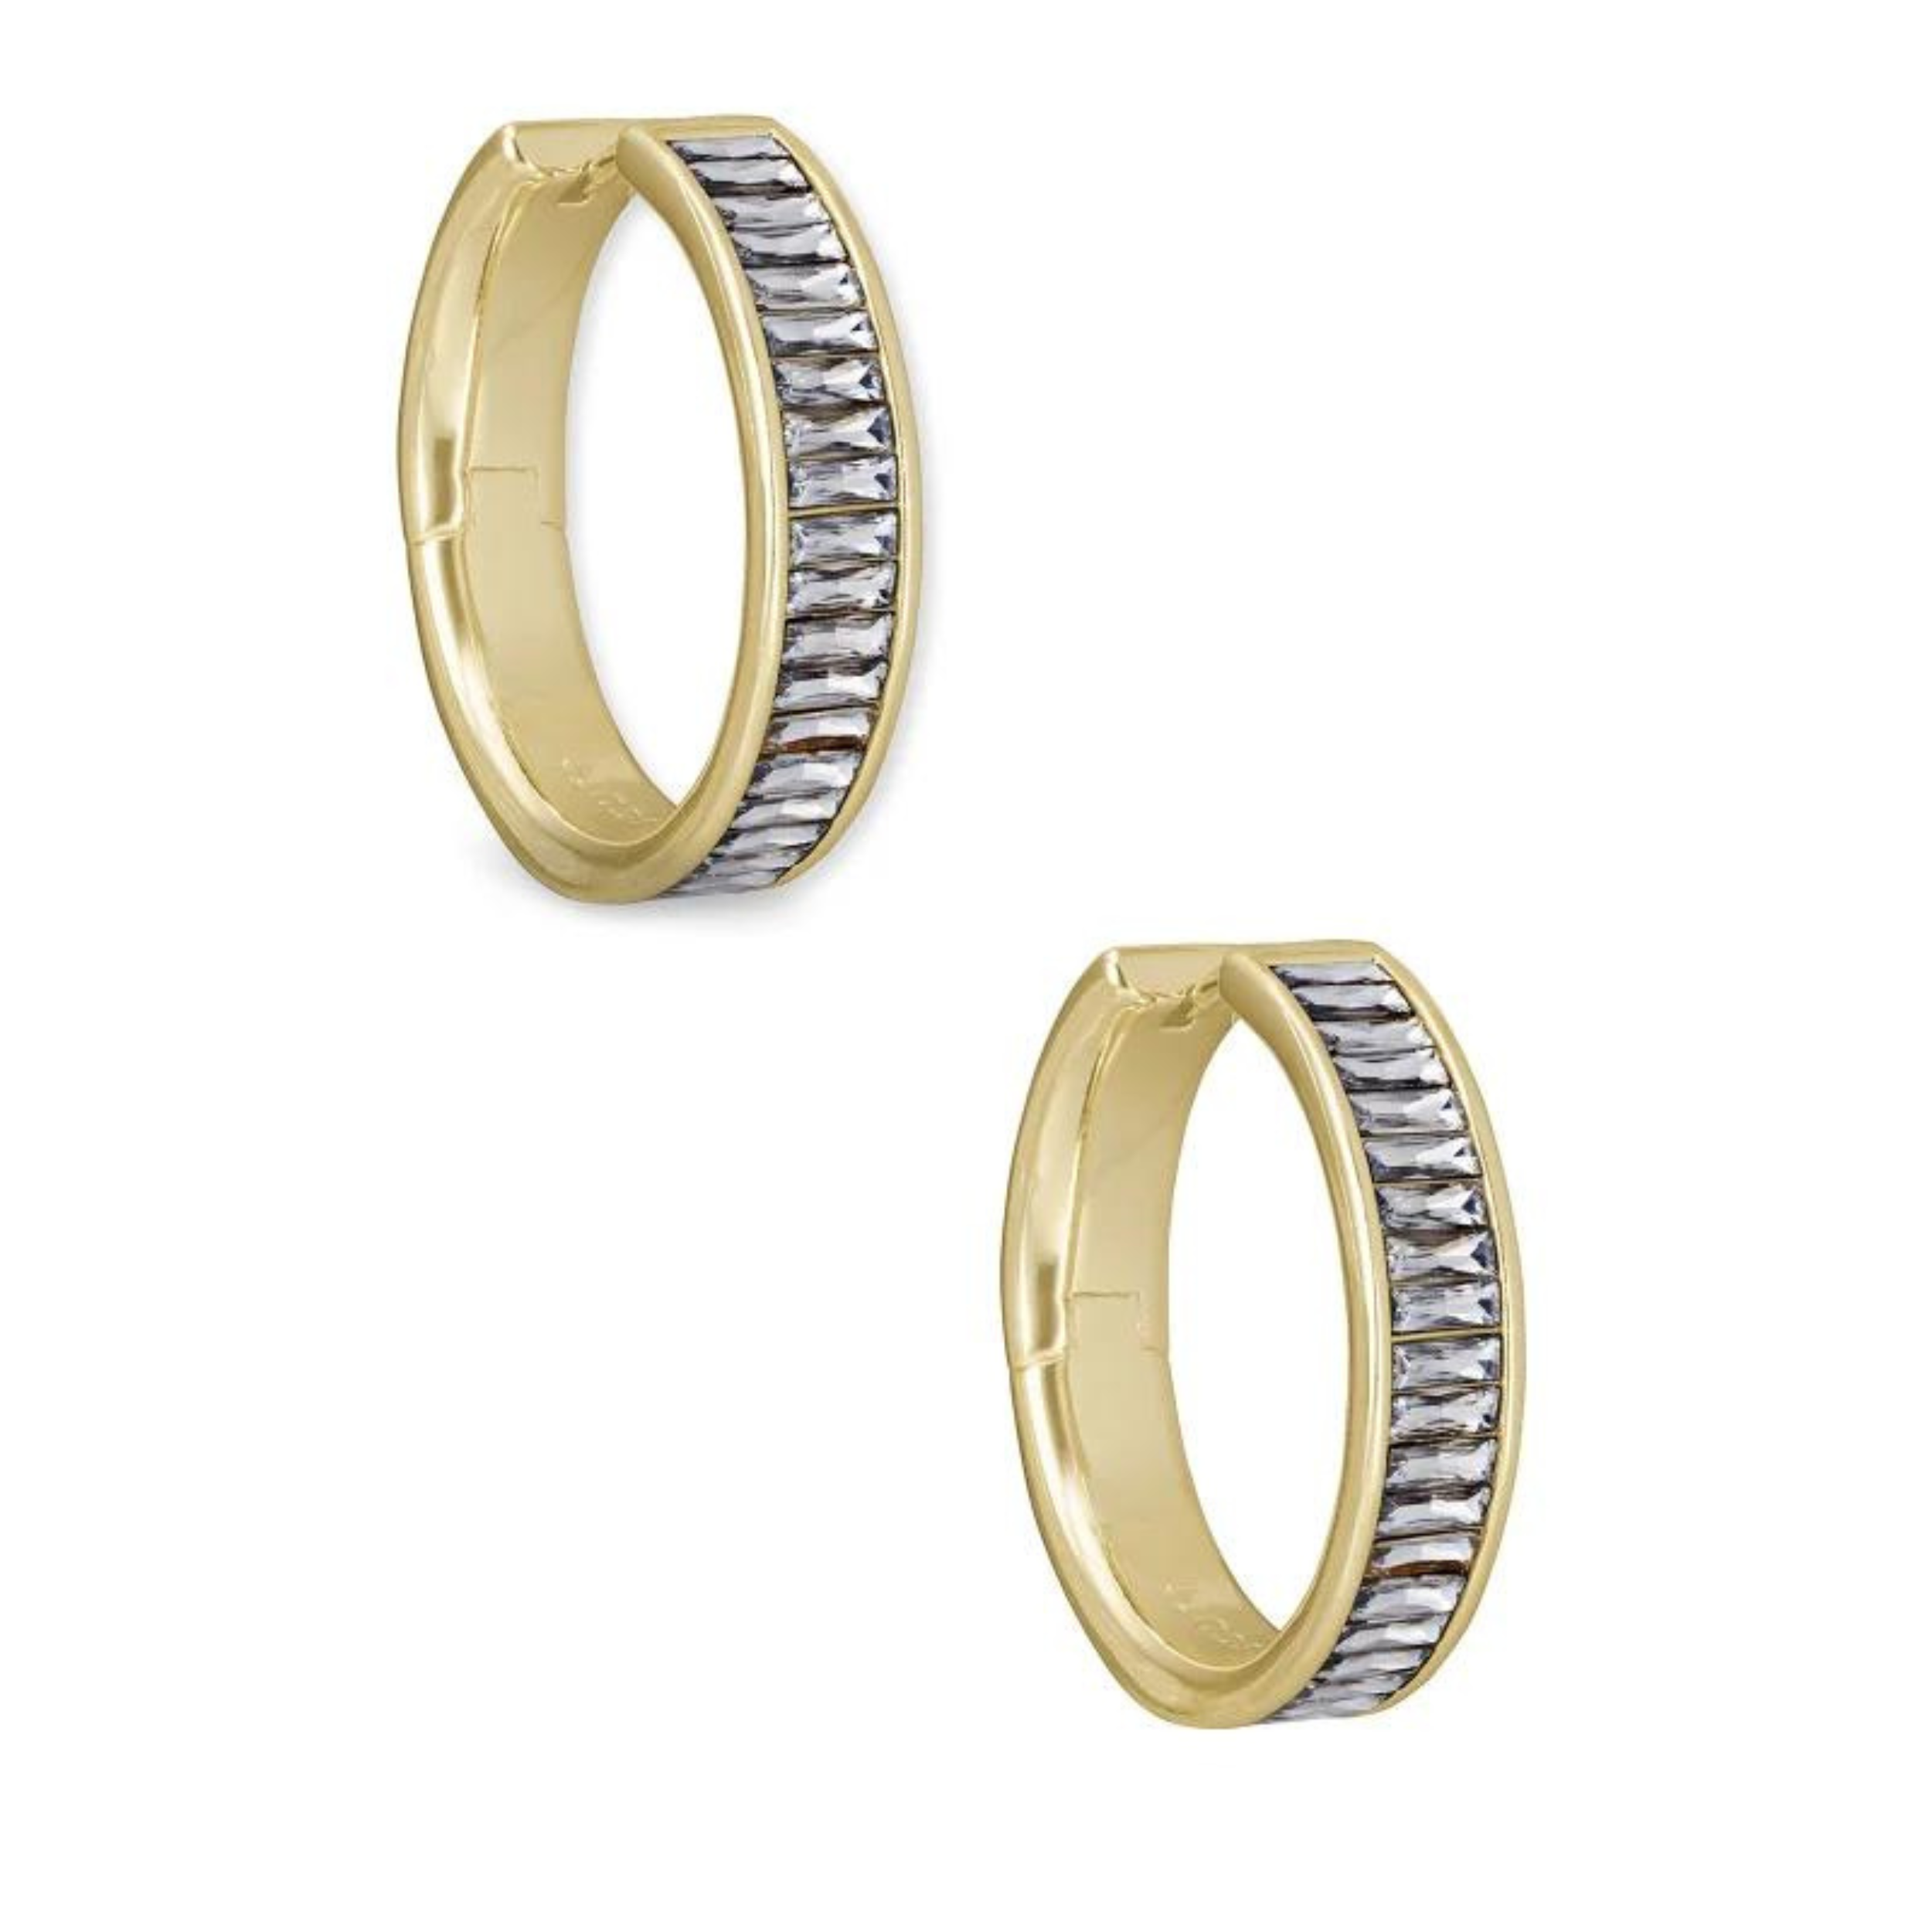 Gold hoop earrings with clear crystals, pictured on a white background.